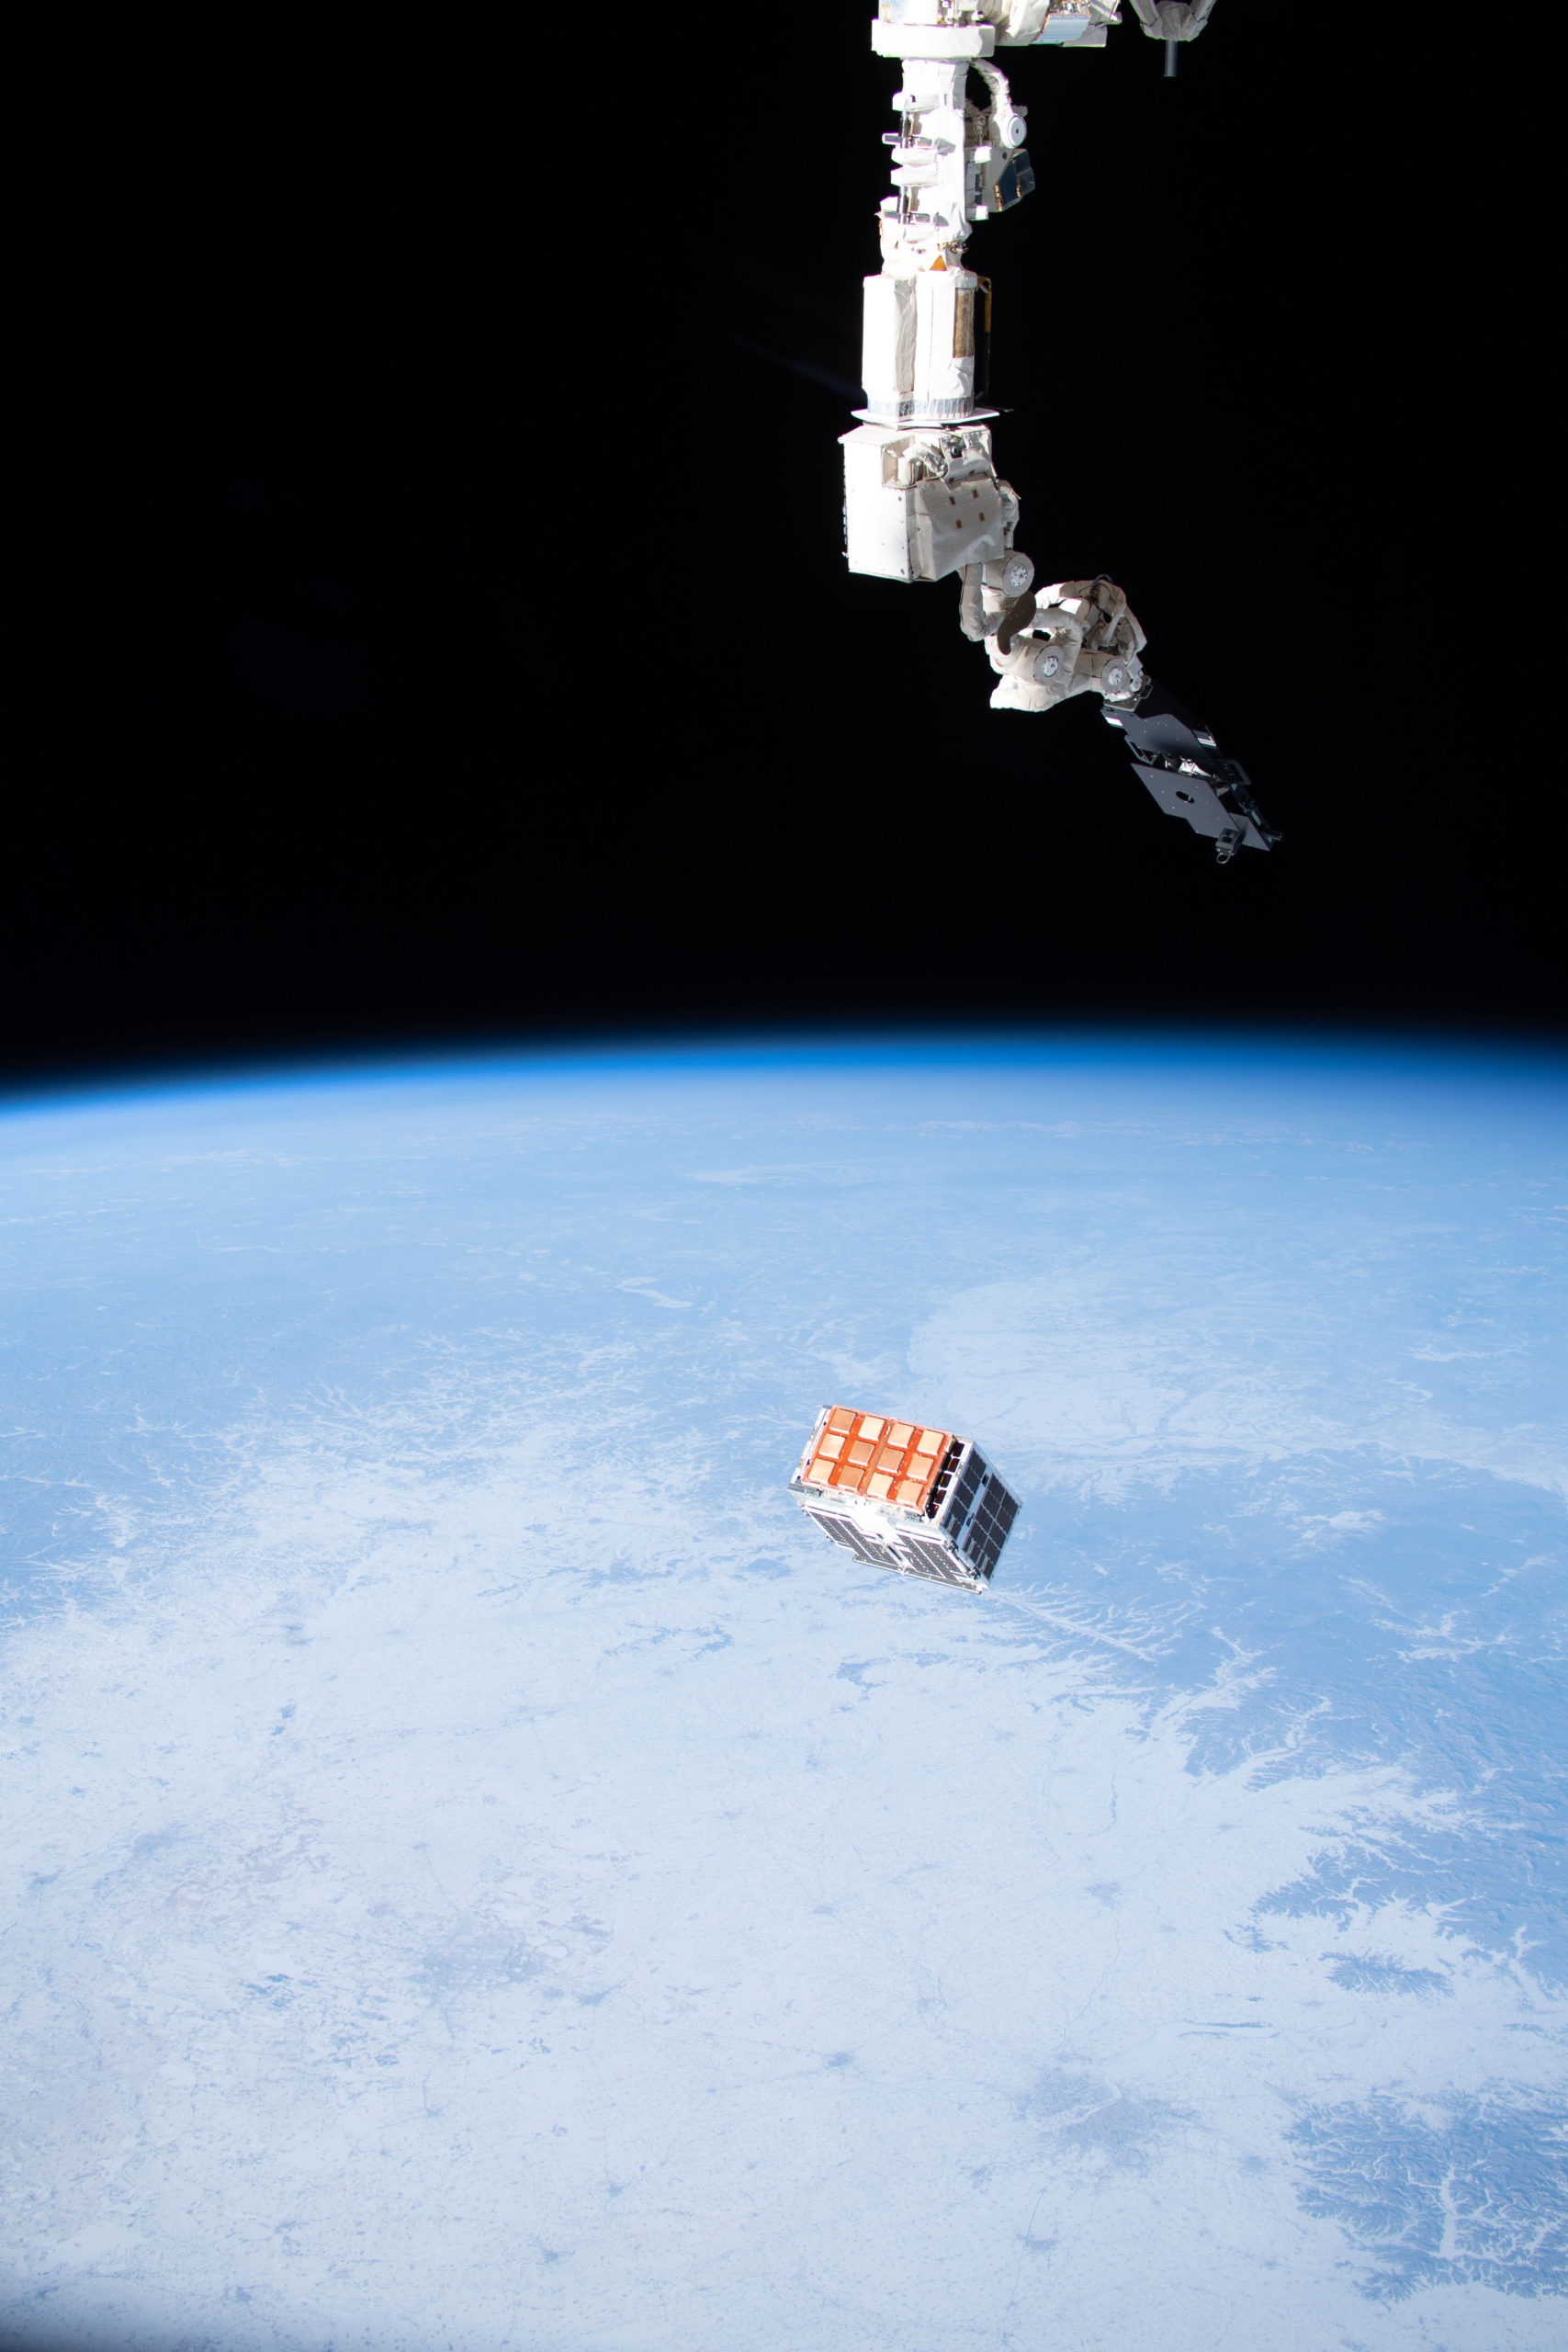 Experimental Spacecraft STPSat 4 being released into low earth orbit from SSIKLOPS (Space Station Integrated Kinetic Launcher for Orbital Payload Systems)